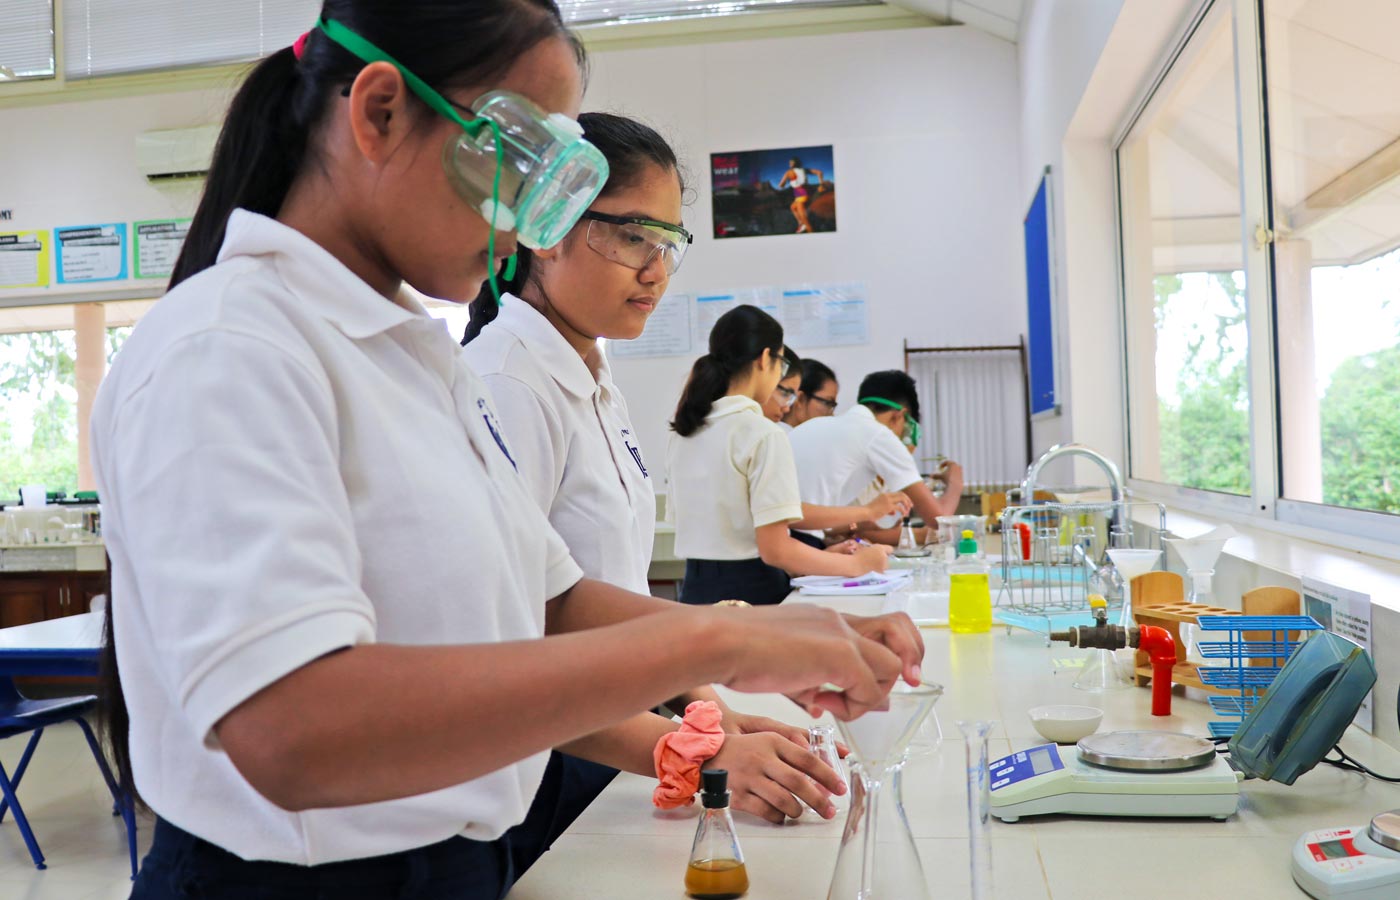 Jay Pritzker Academy, Siem Reap, Cambodia. Grade 10 science students in the JPA science laboratory.